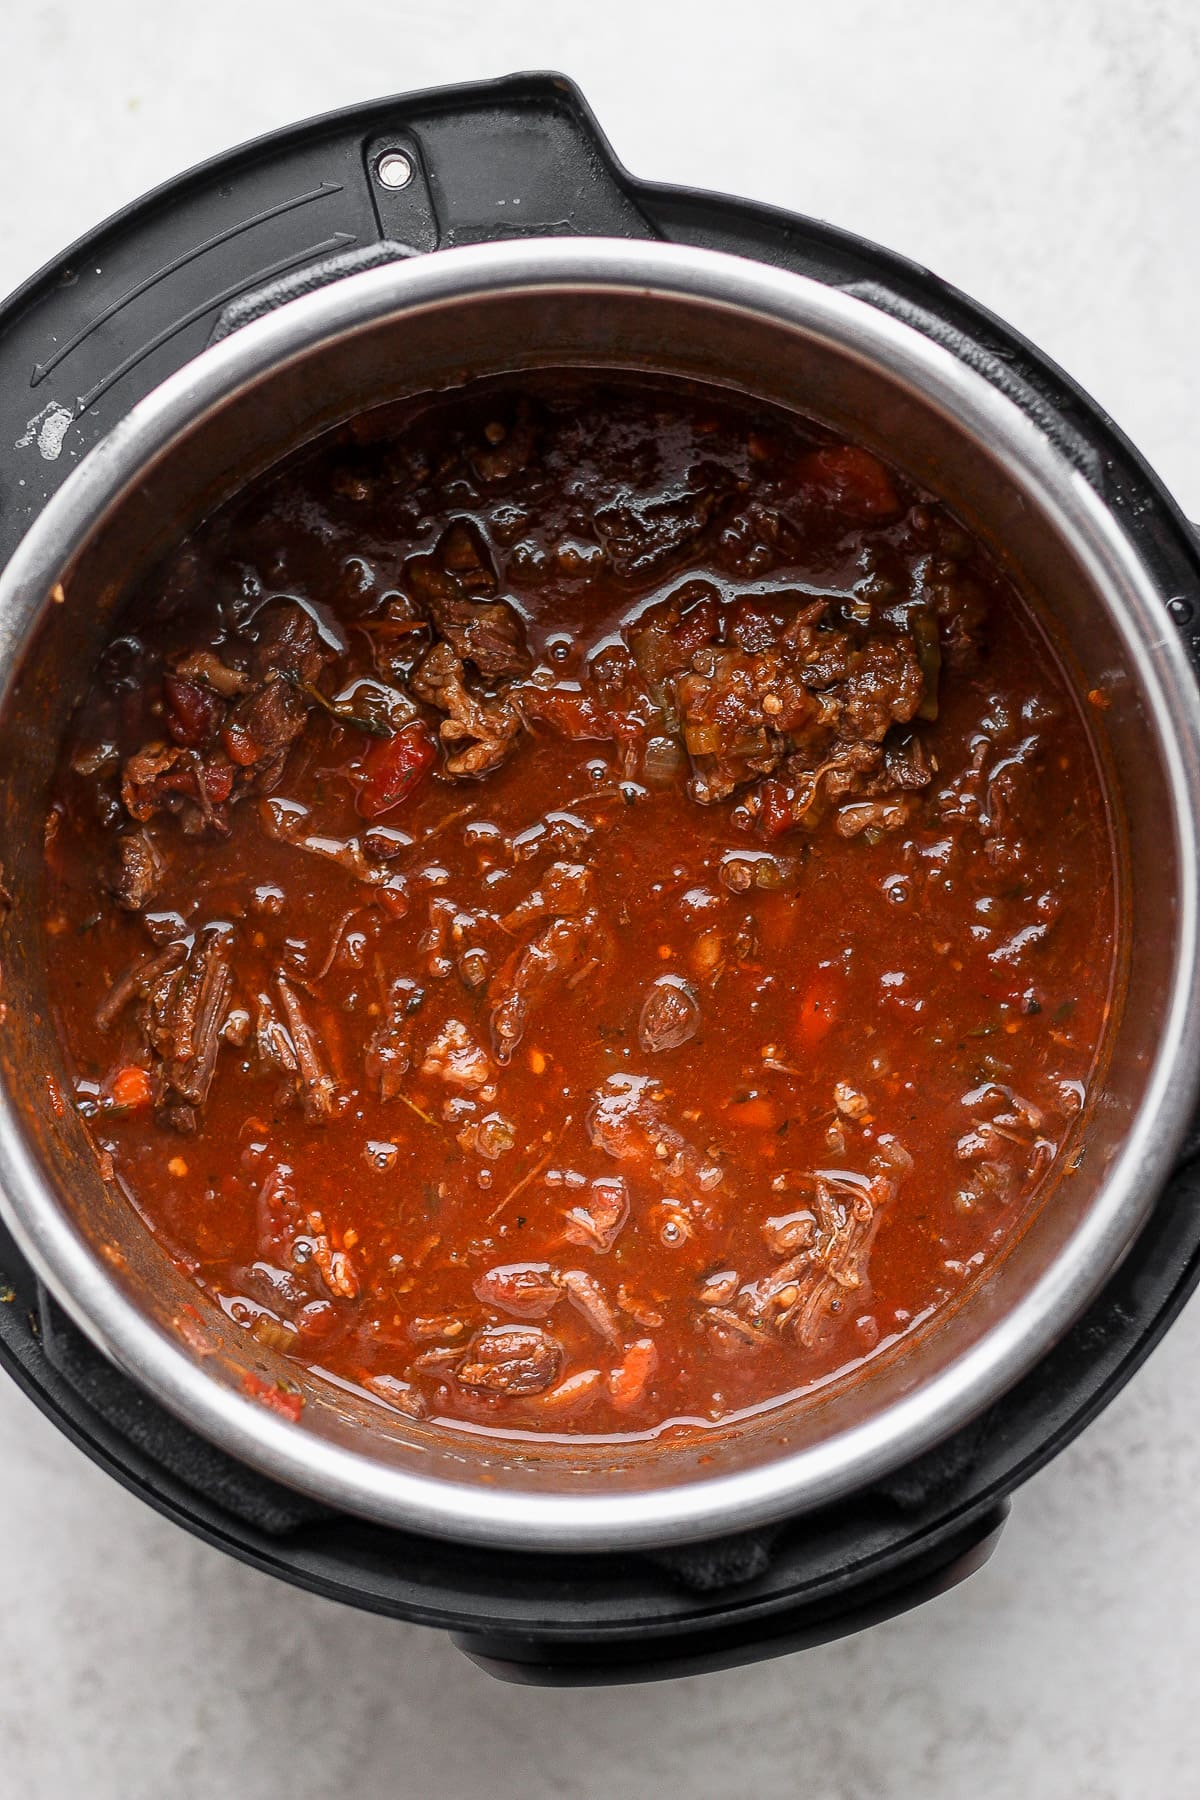 Cooked beef ragu in a pressure cooker.